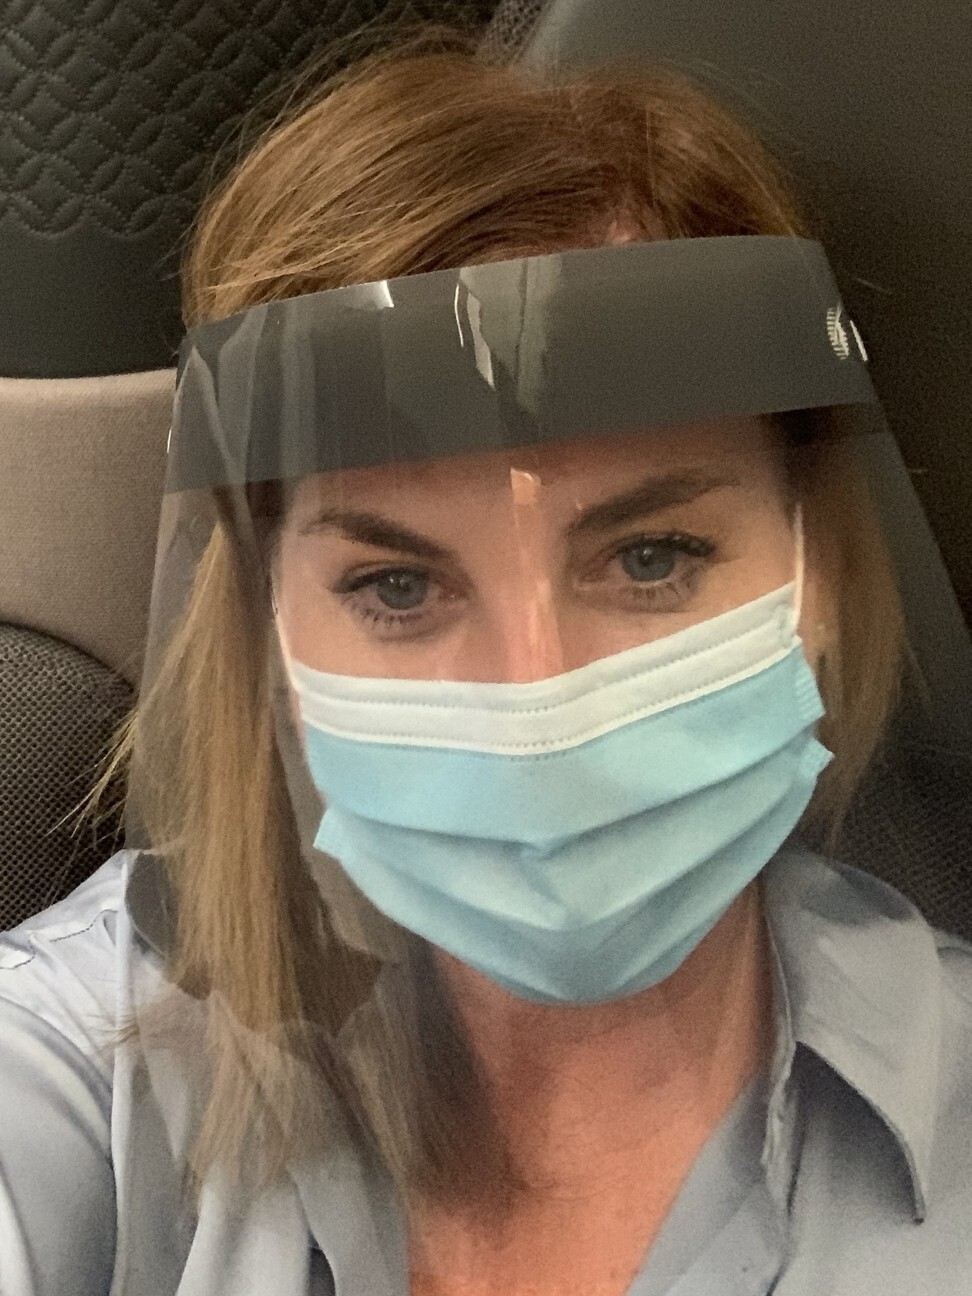 SCMP writer Lee Cobaj wears a visor and face mask as she flies to the Maldives with Qatar Airways. Photo: Lee Cobaj